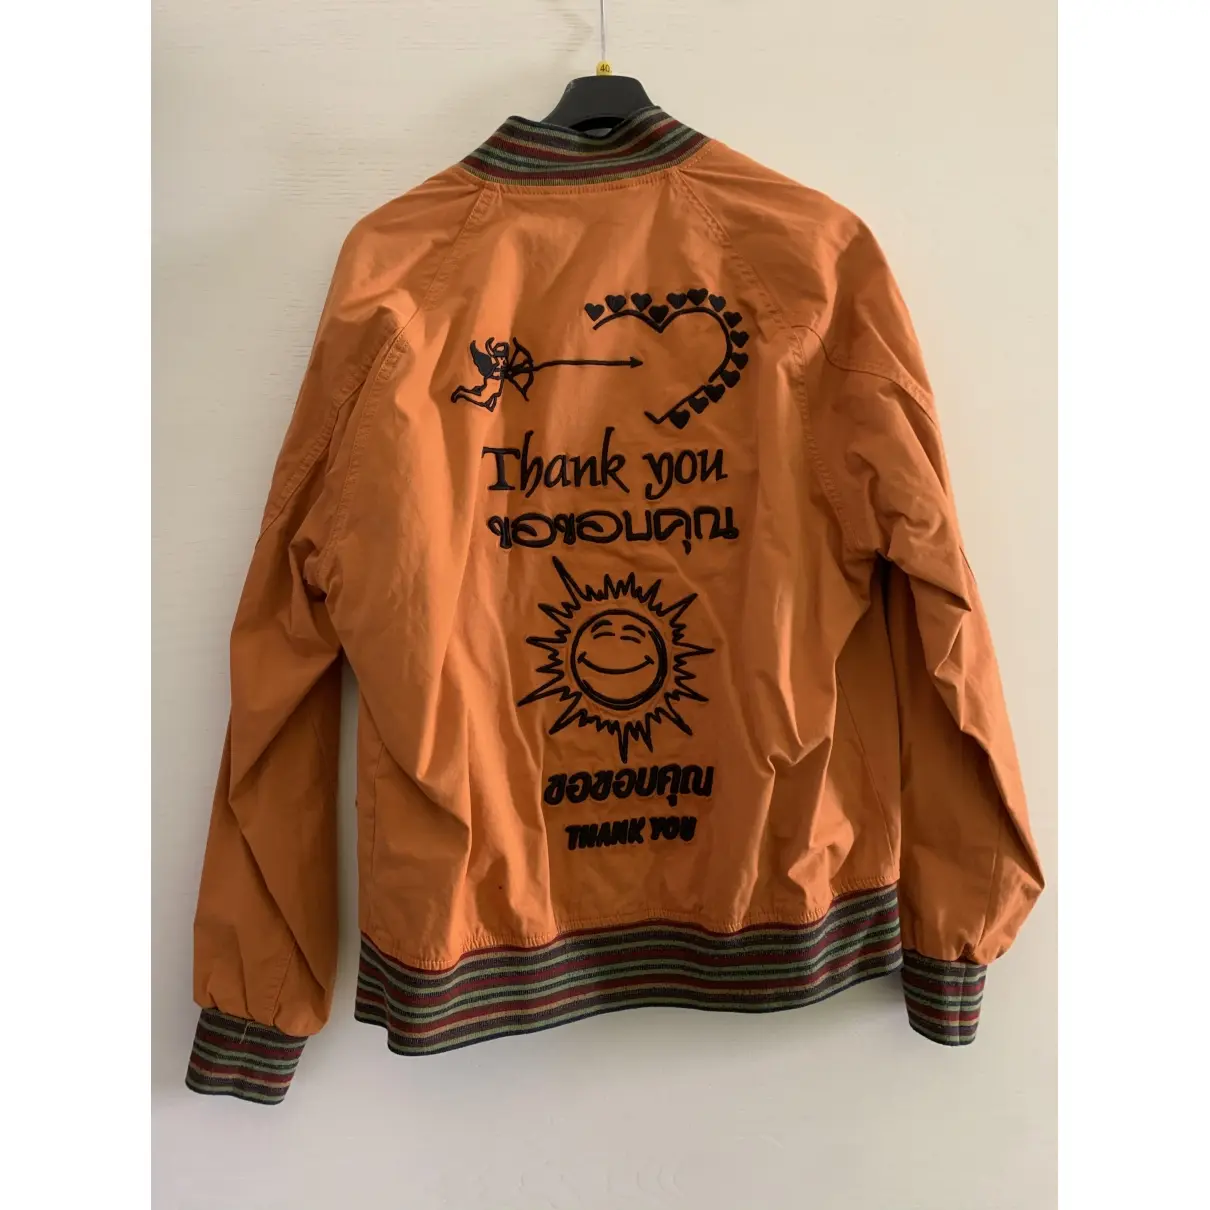 Vivienne Westwood Anglomania Jacket for sale